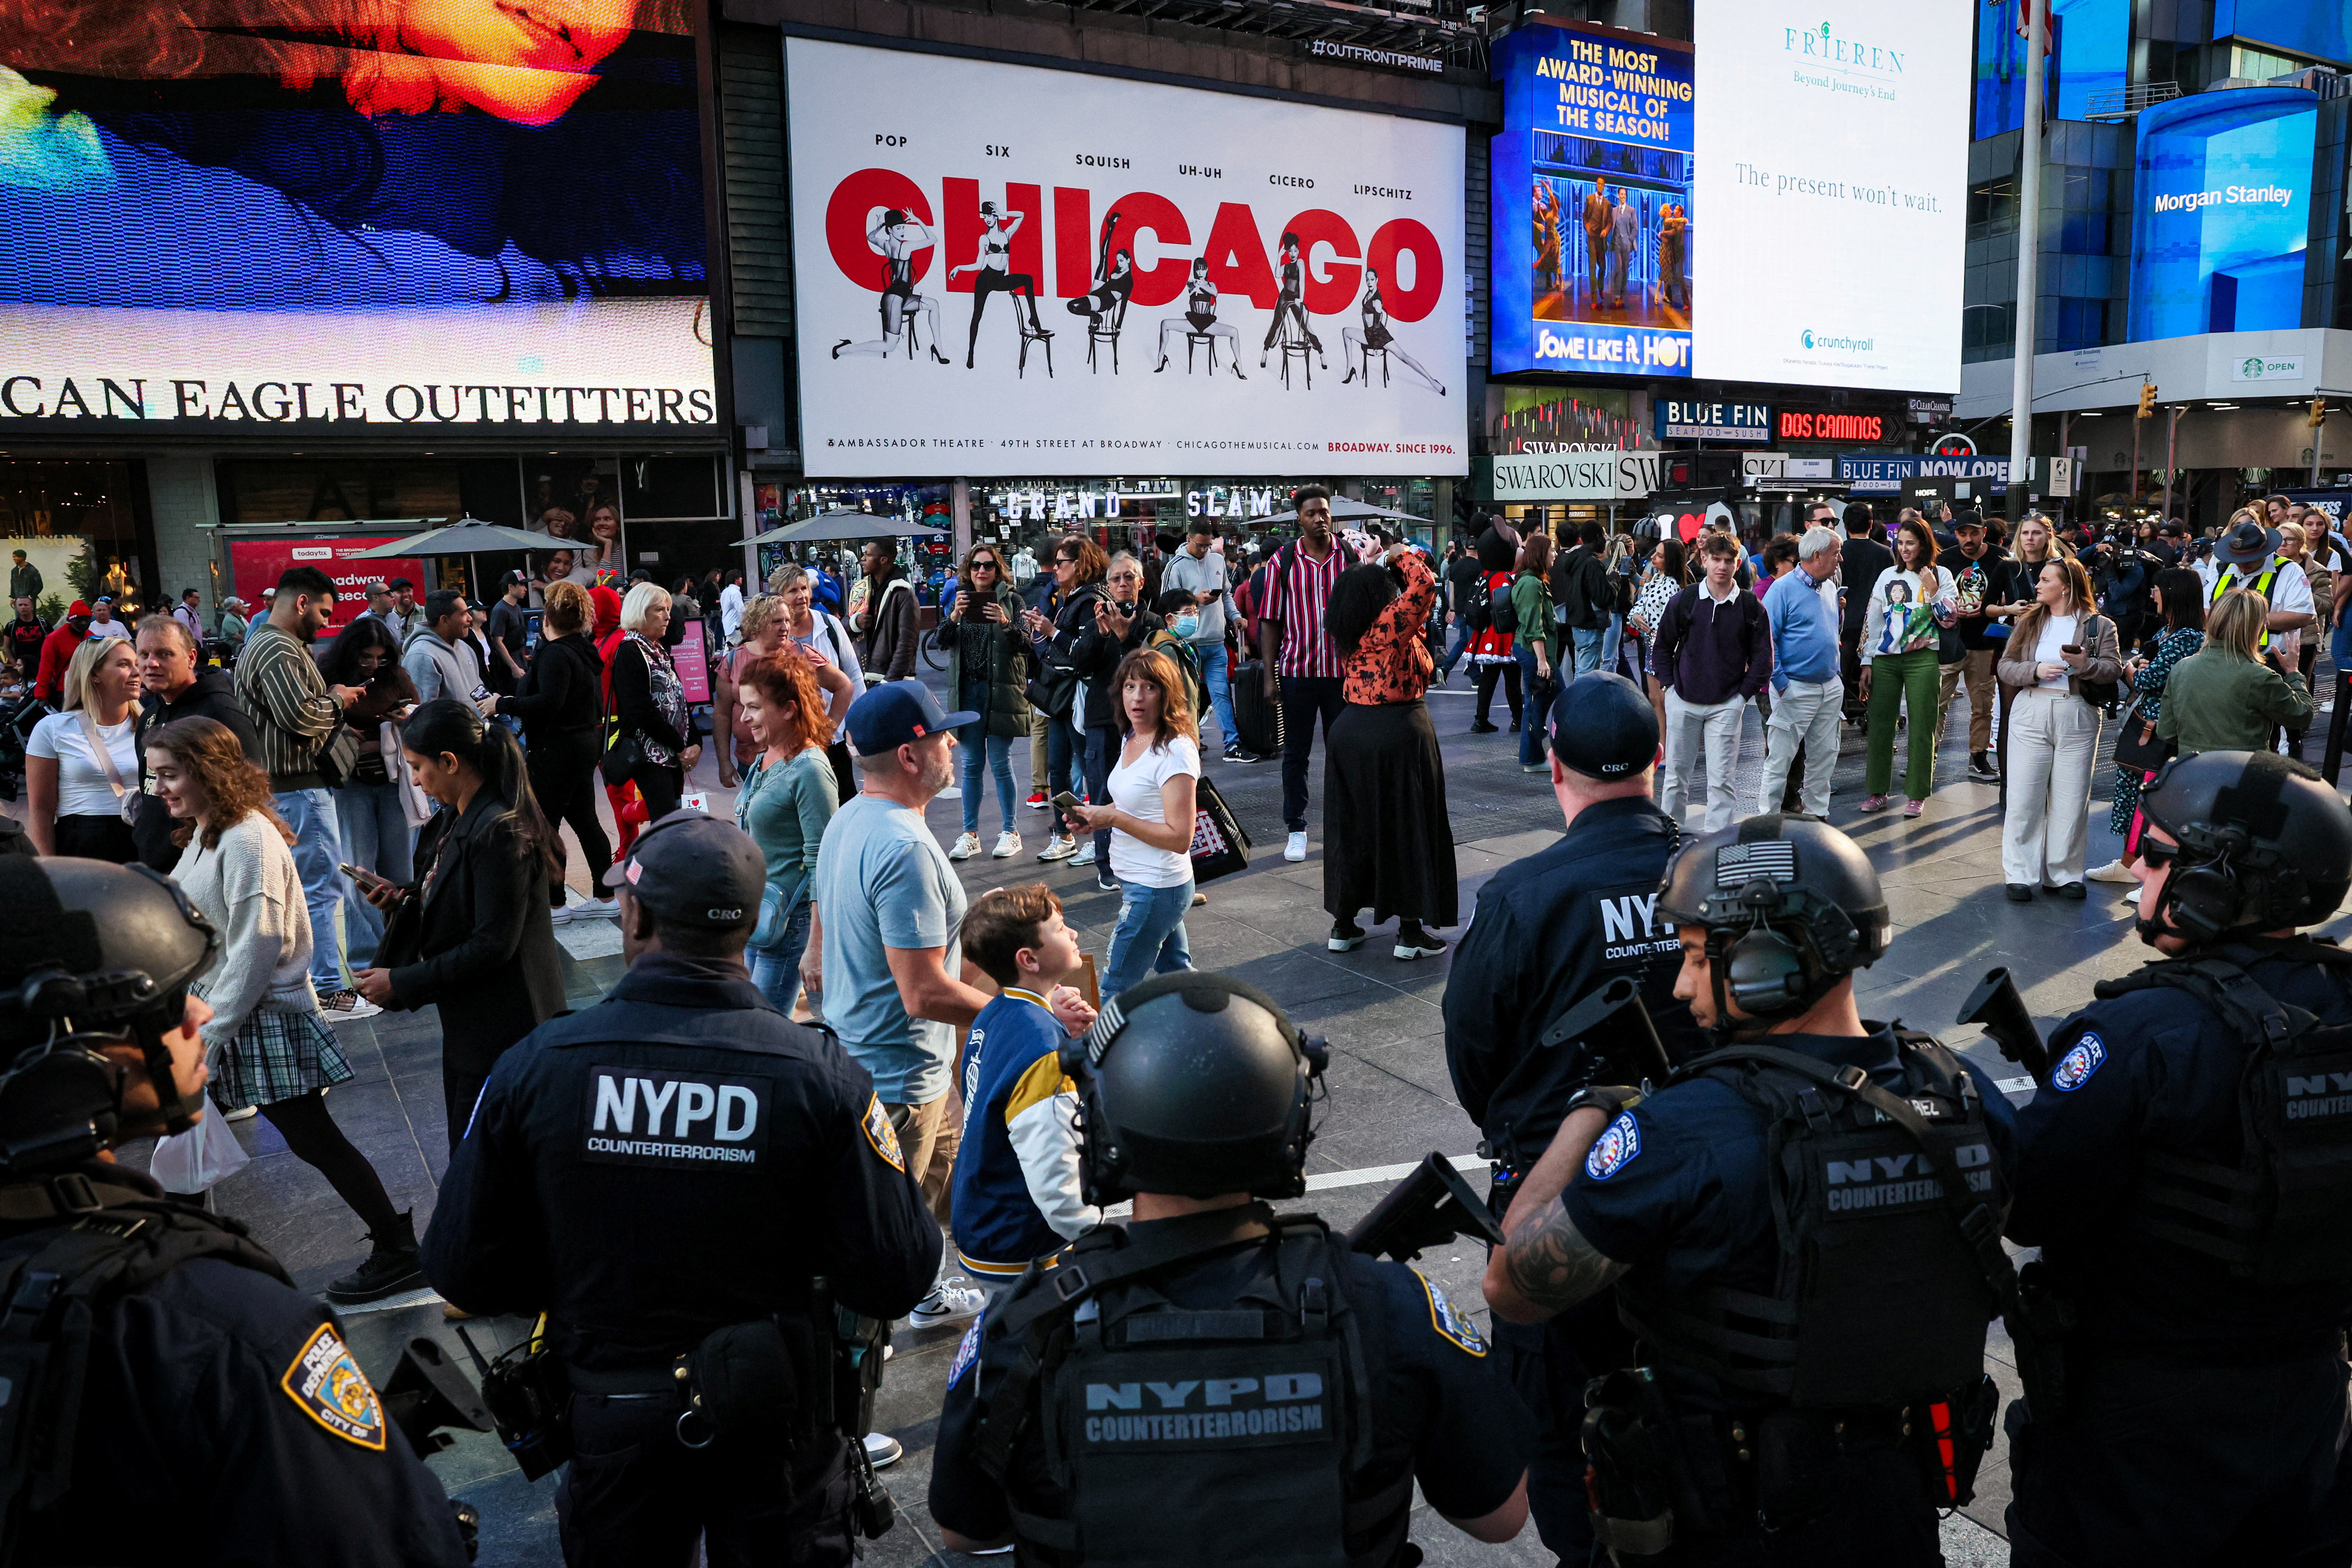 Members of the NYPD patrol in Times Square in New York